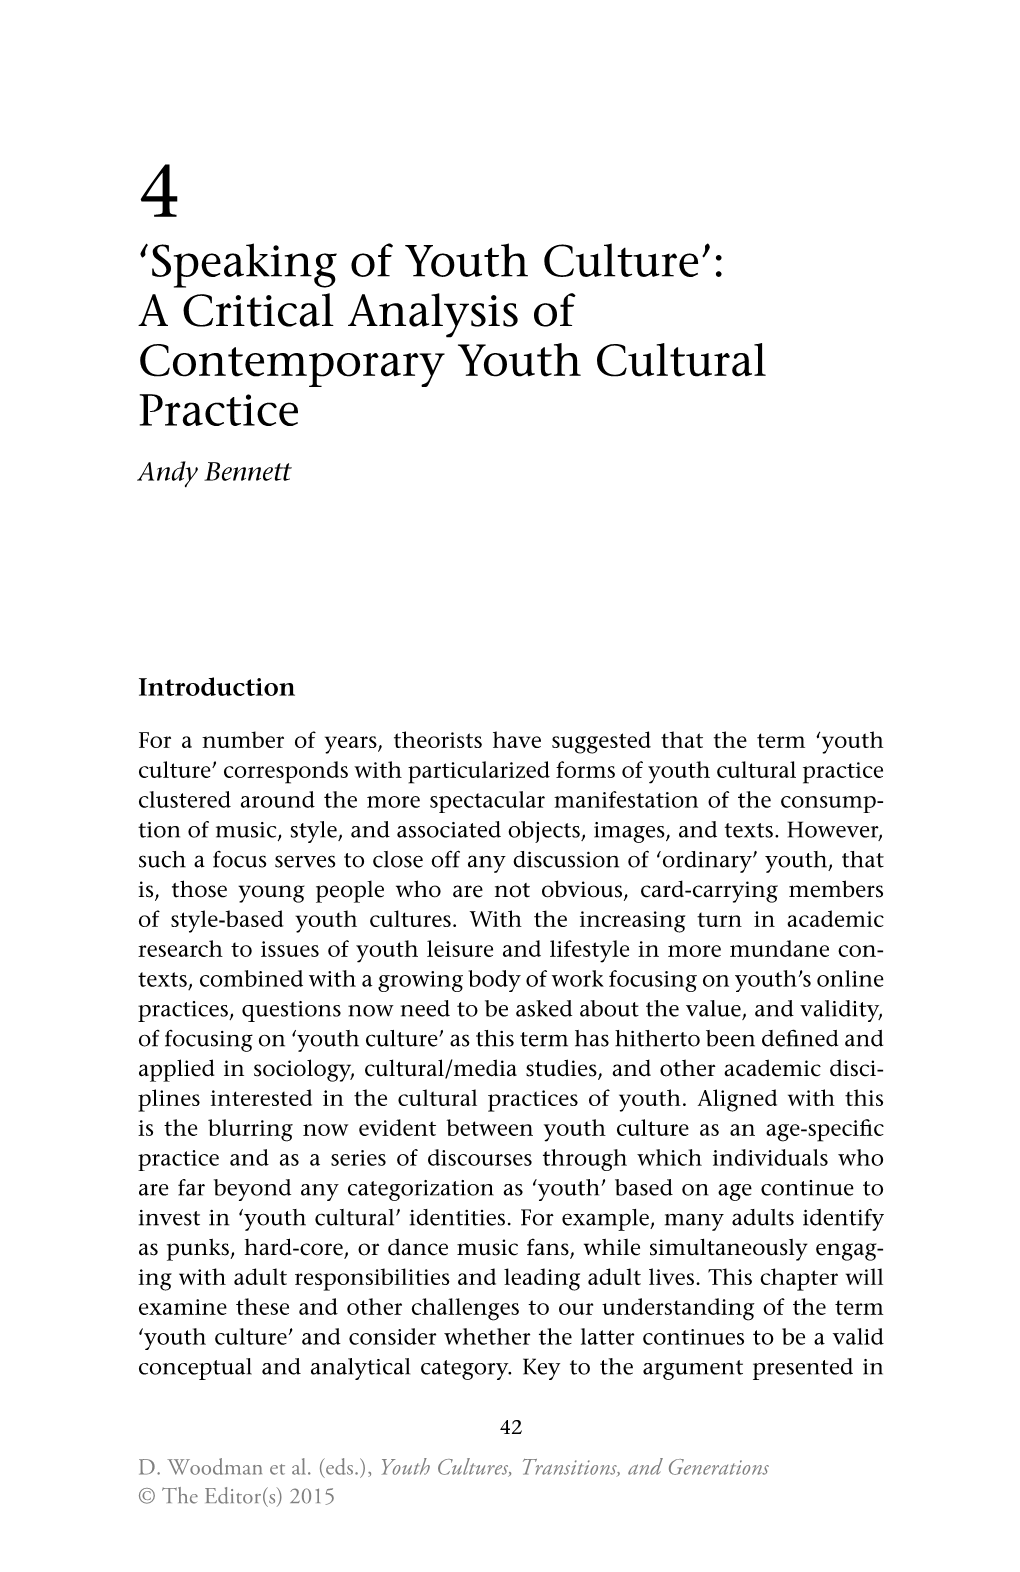 'Speaking of Youth Culture': a Critical Analysis of Contemporary Youth Cultural Practice